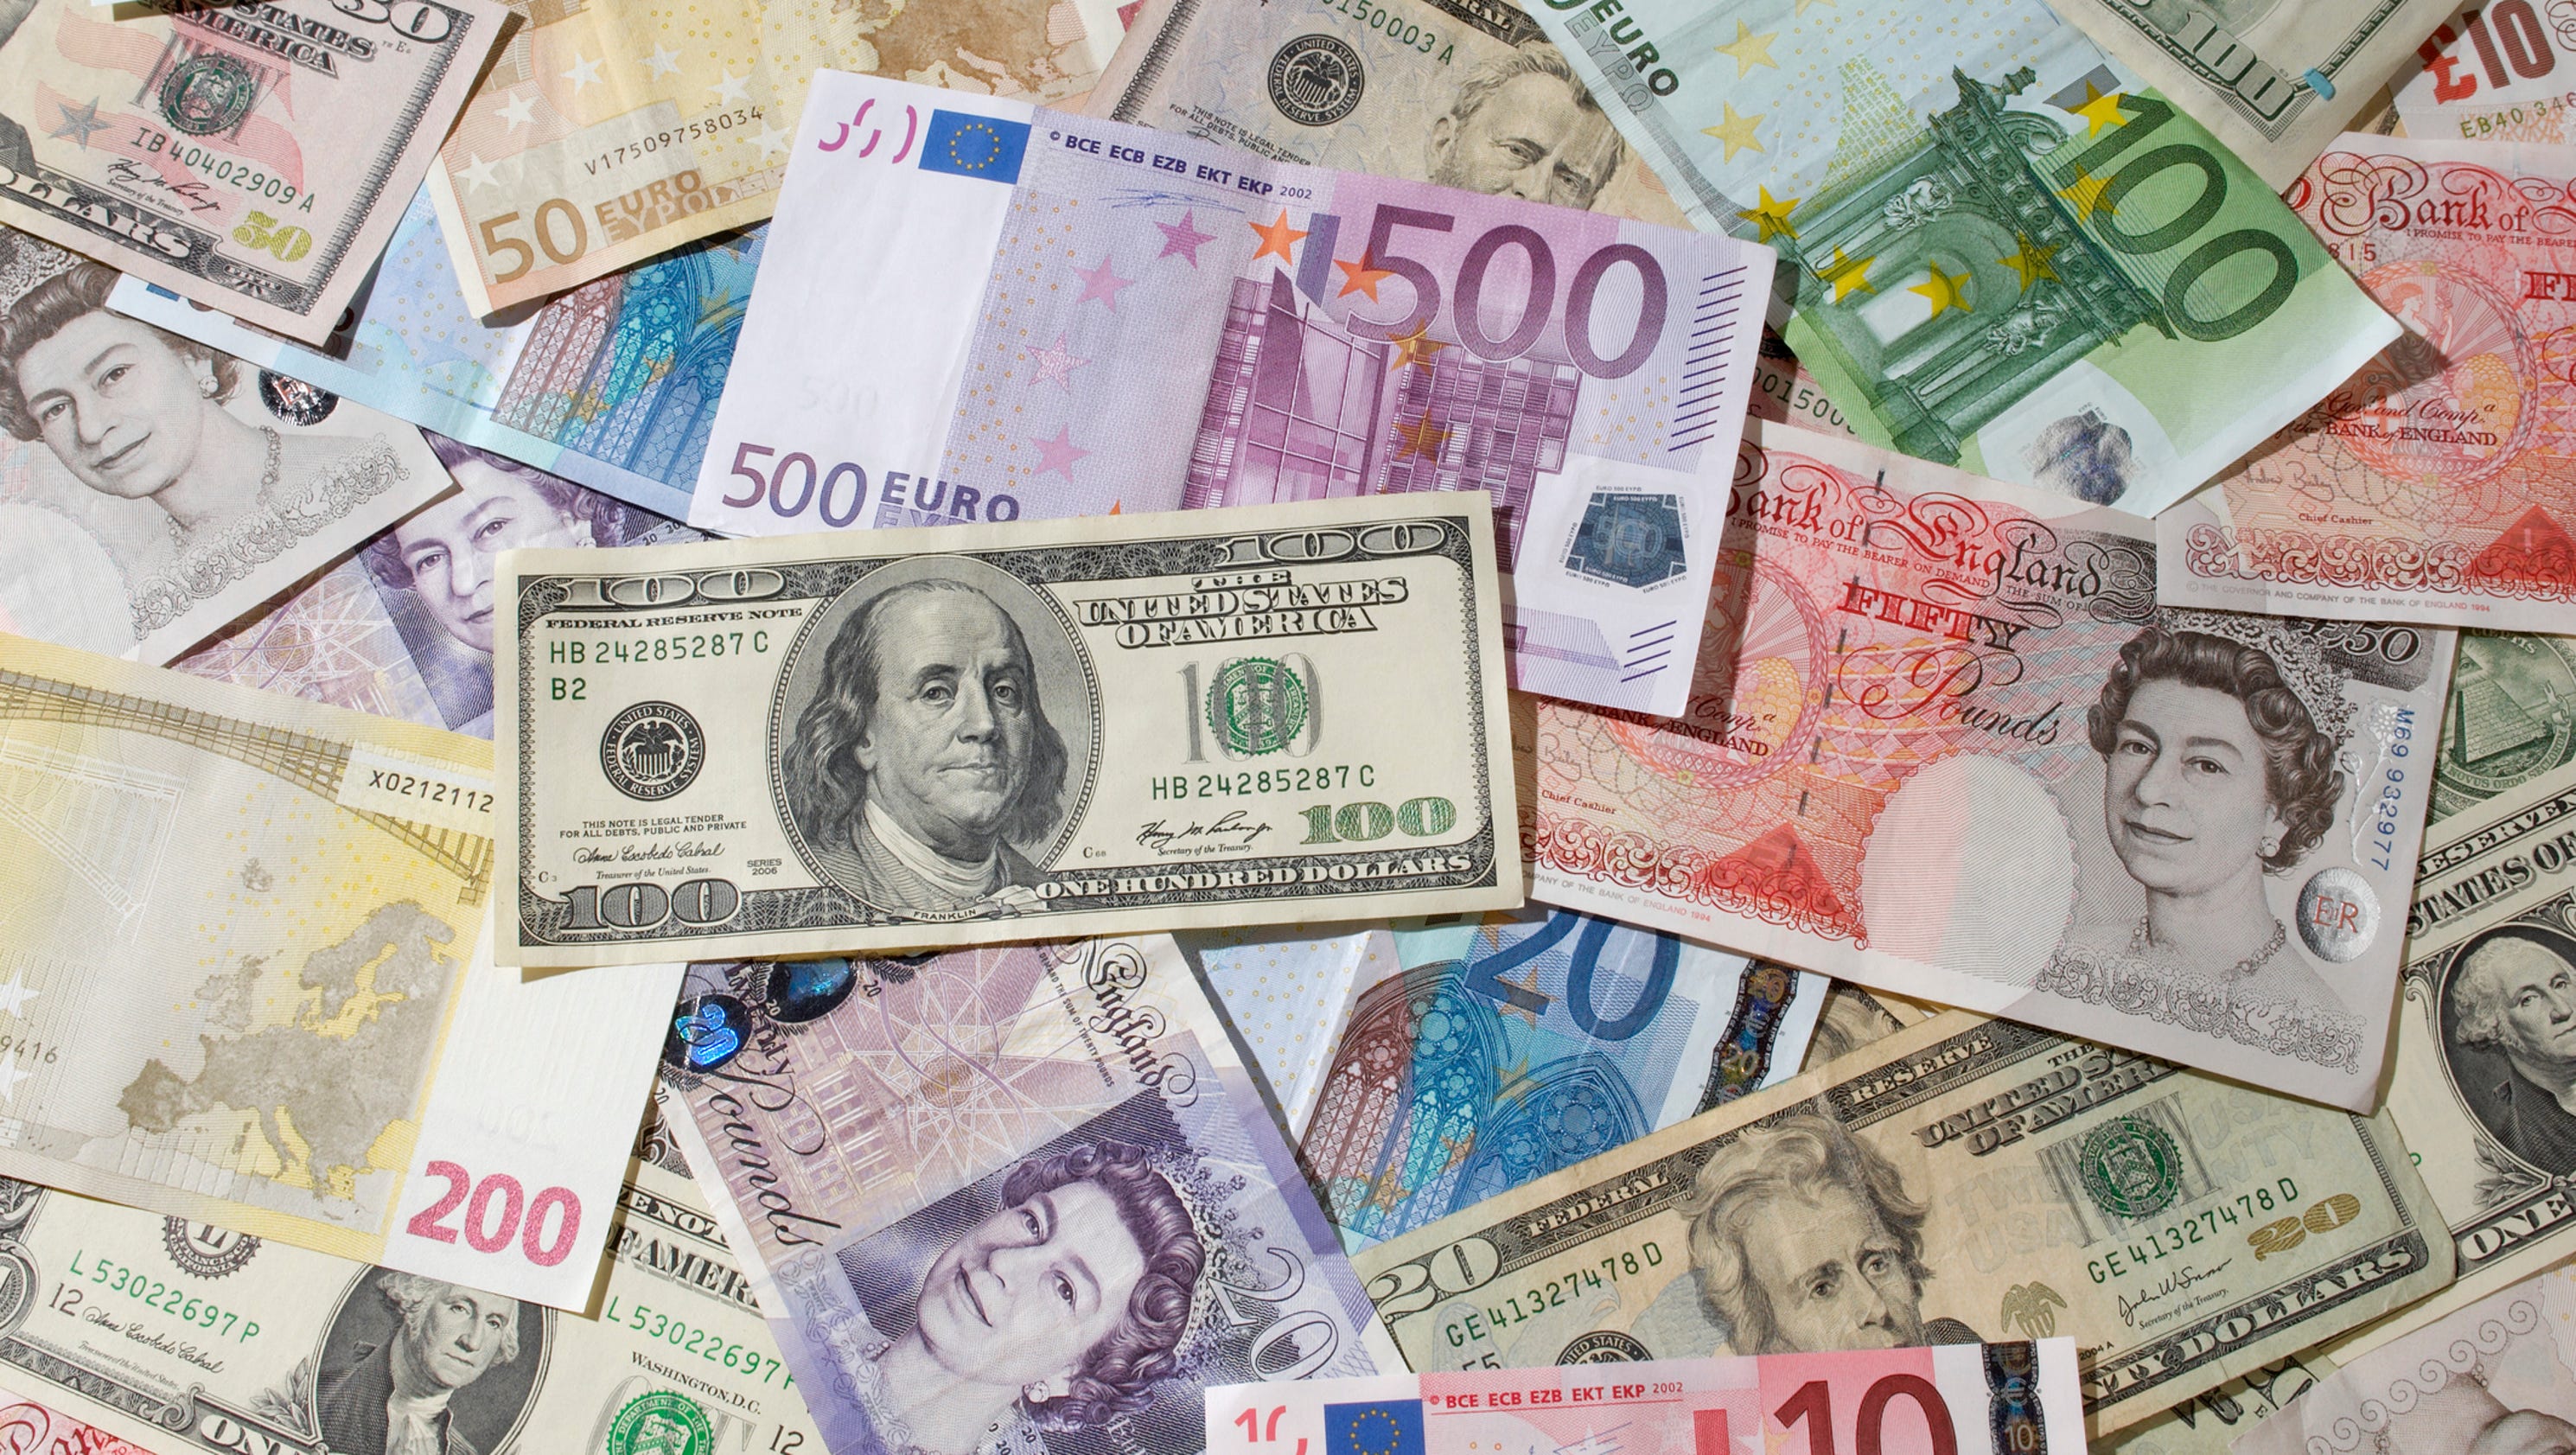 currency-exchange-101-what-to-know-before-you-go